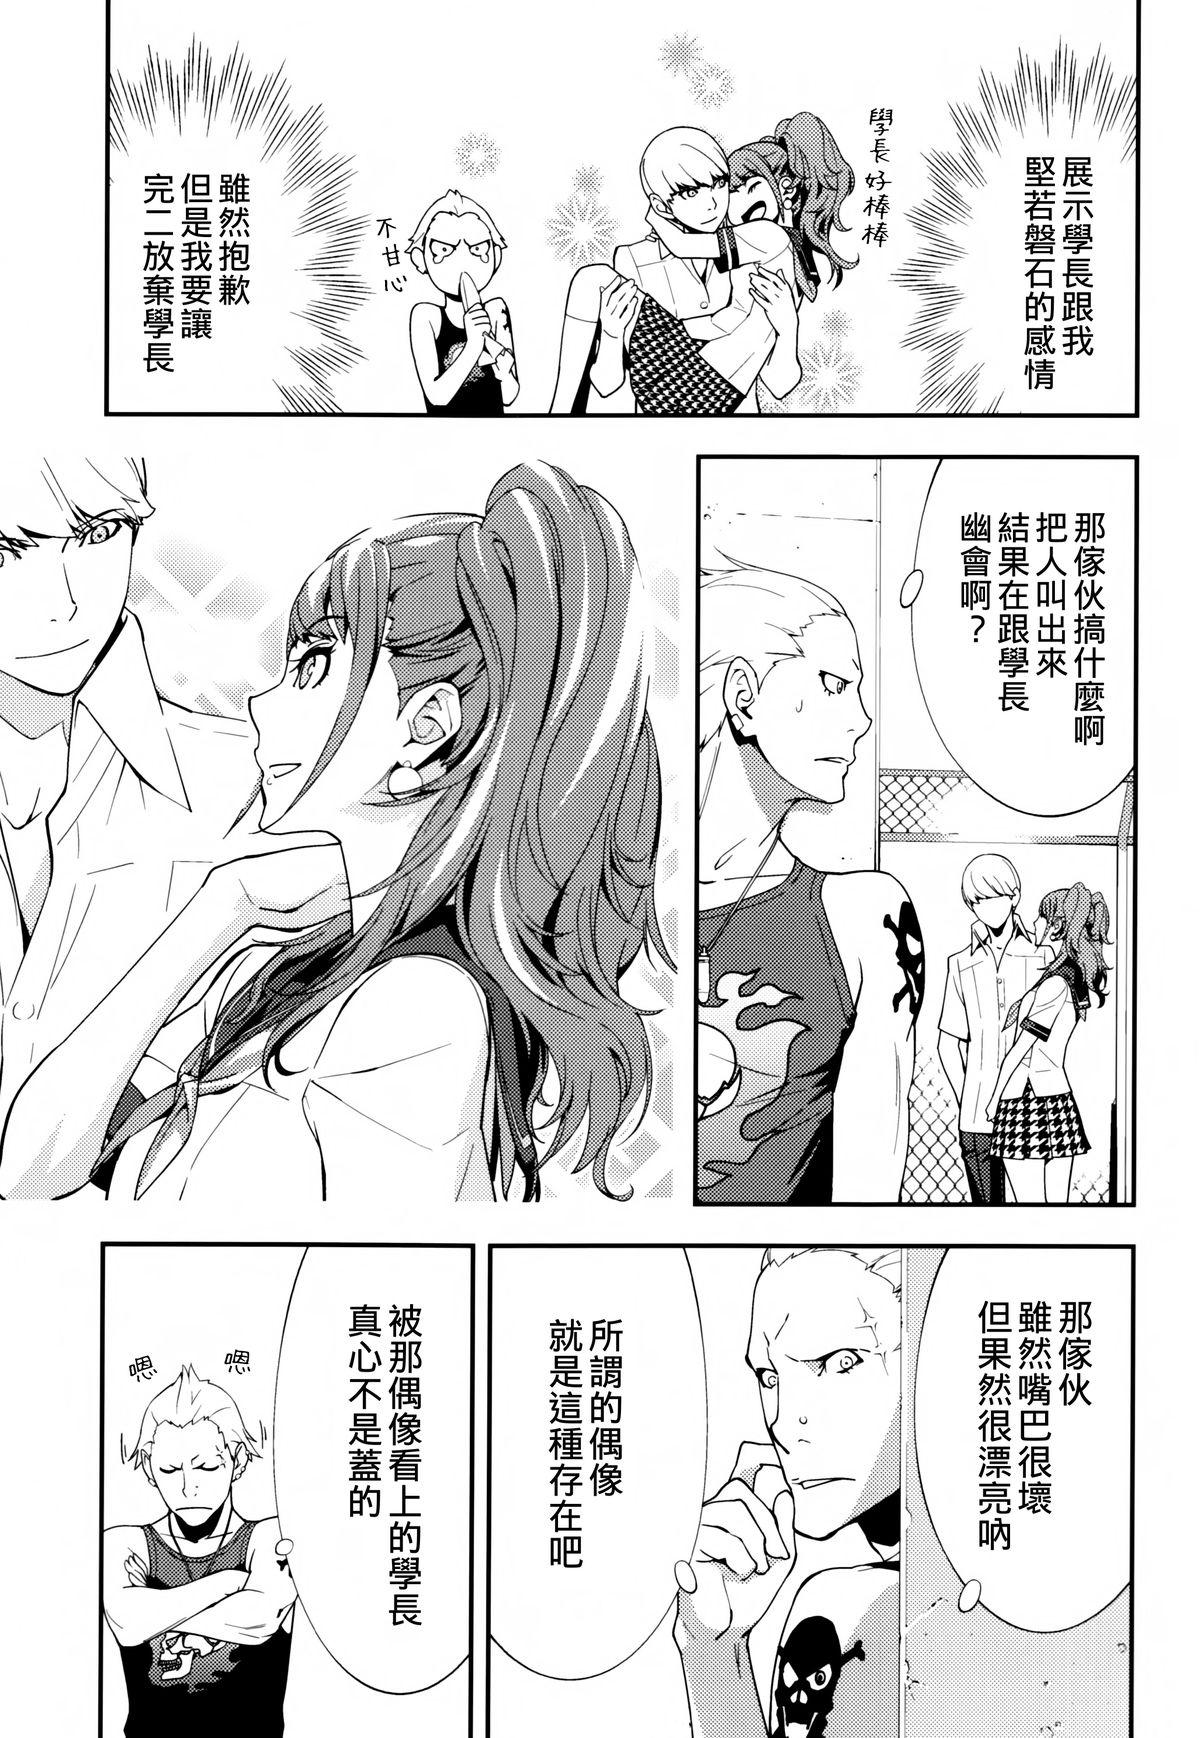 Reality Rise Sexualis 2 - Persona 4 Tranny Sex - Page 8